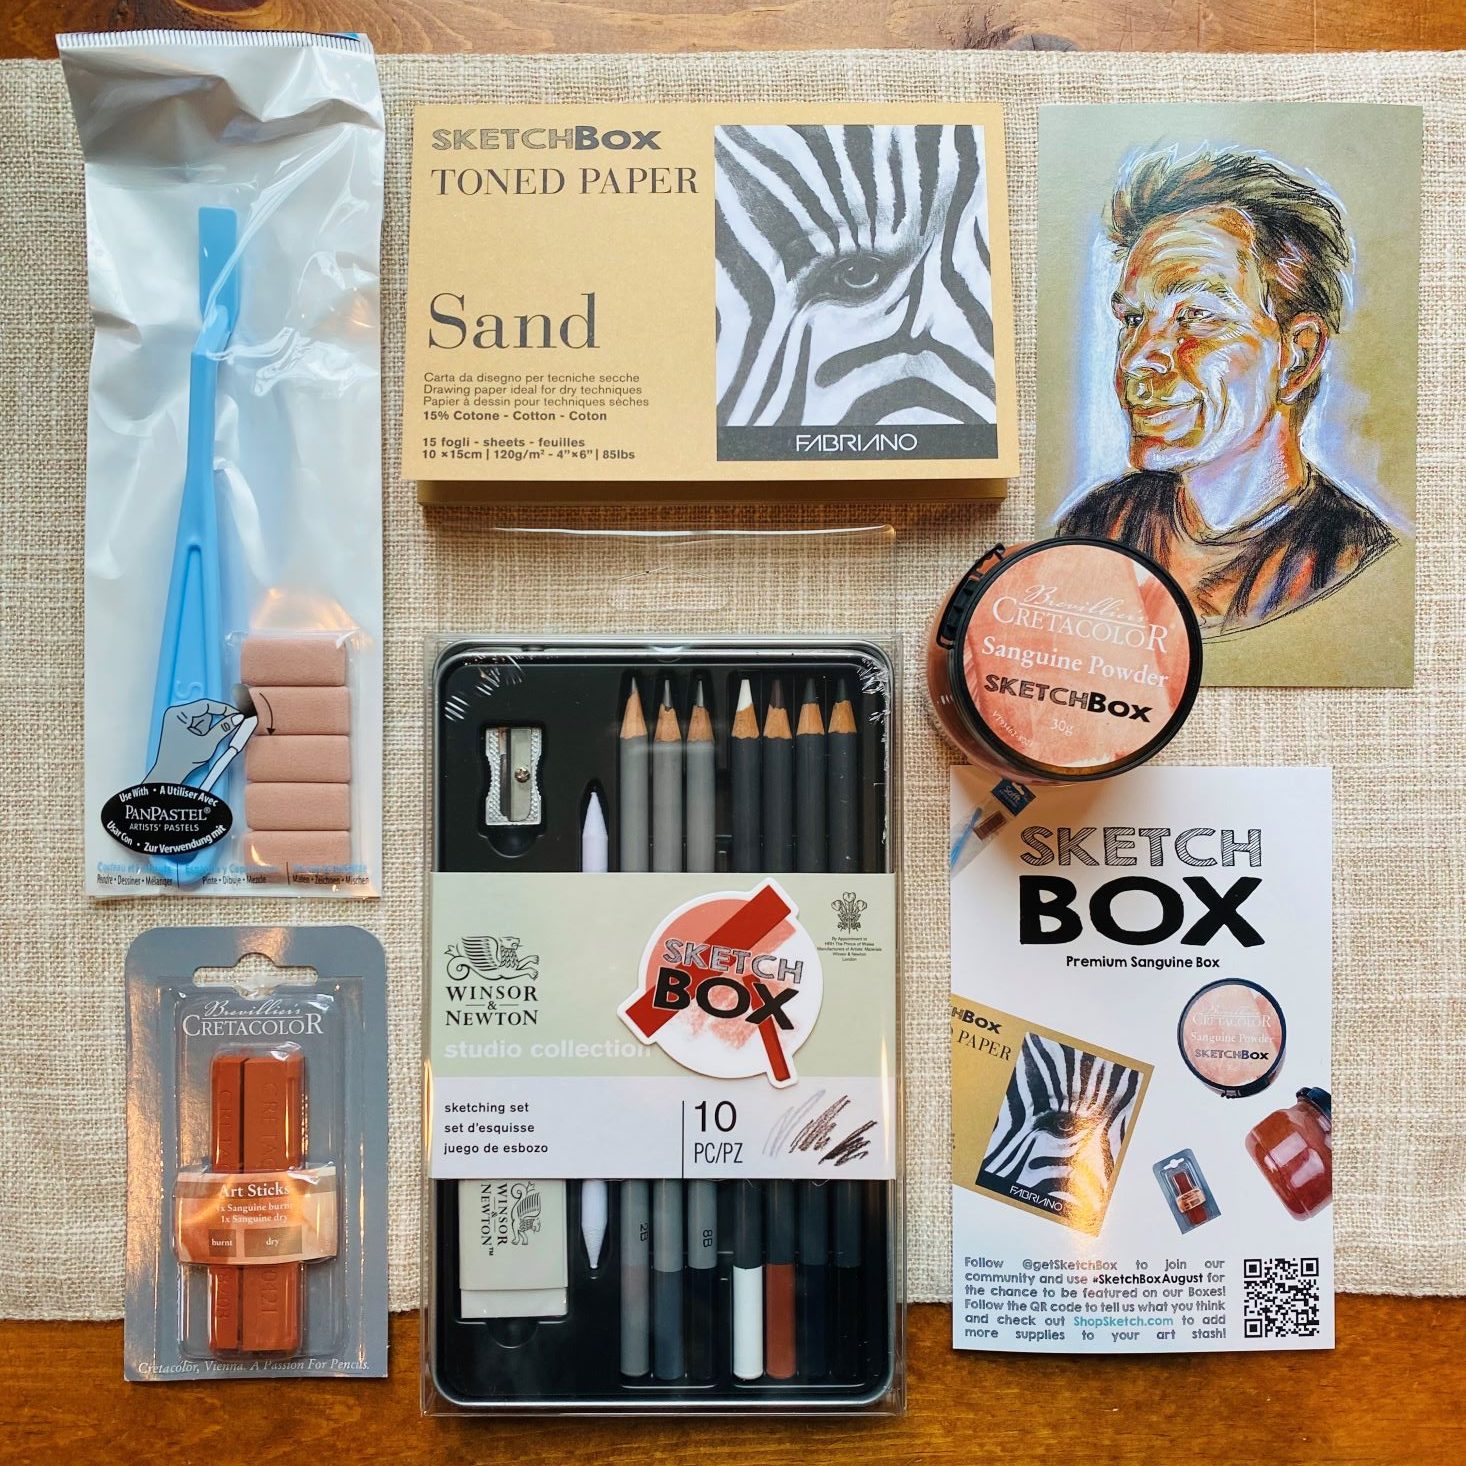 SketchBox - Monthly kits curated by artists for artists